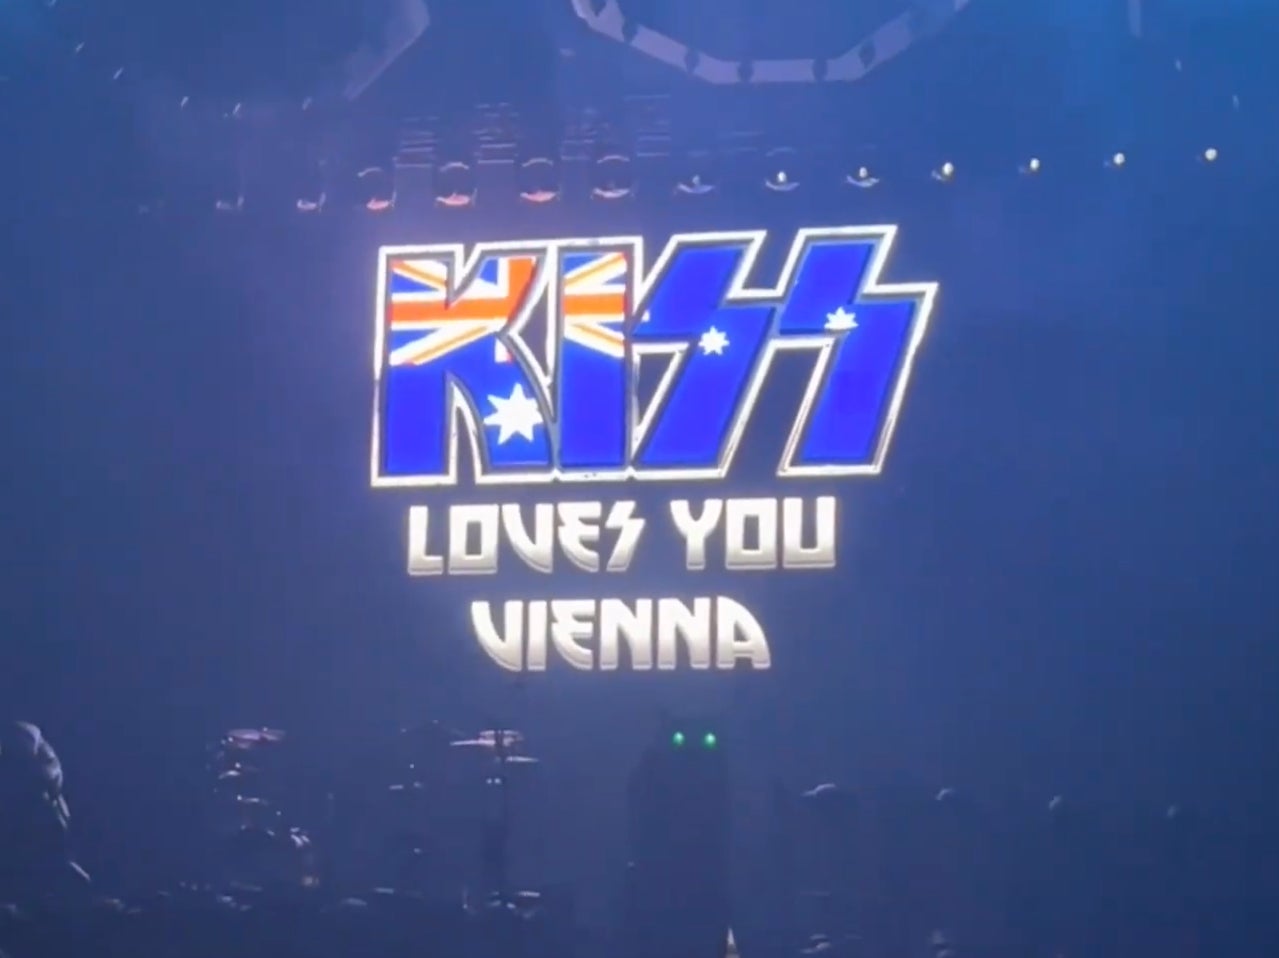 The errant lettering displayed during Kiss’s Vienna gig